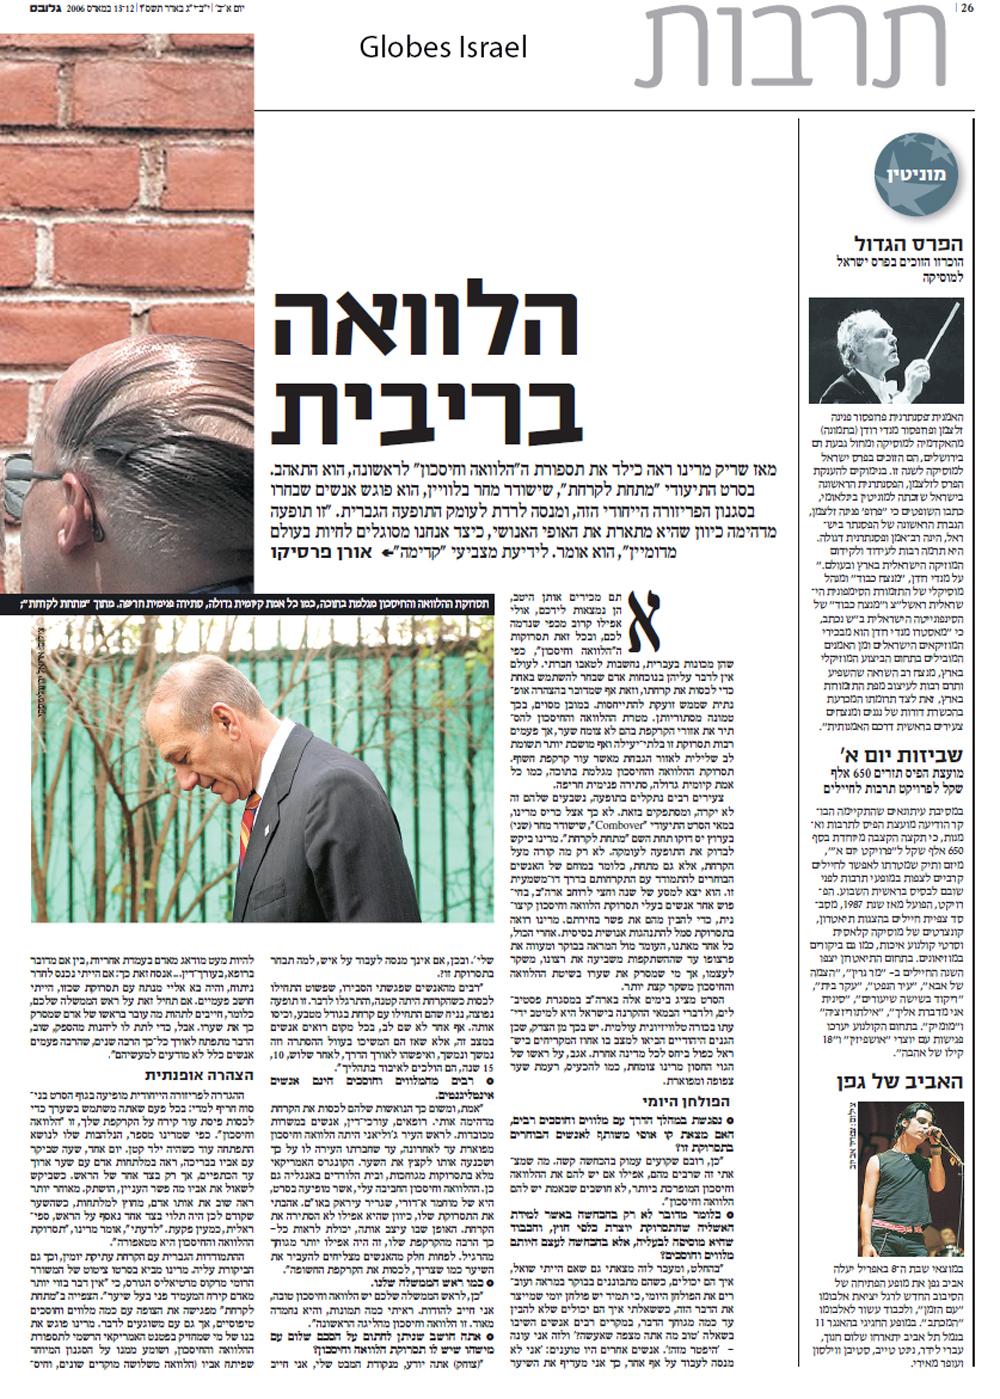 Globes Israel article featuring Combover: the Movie